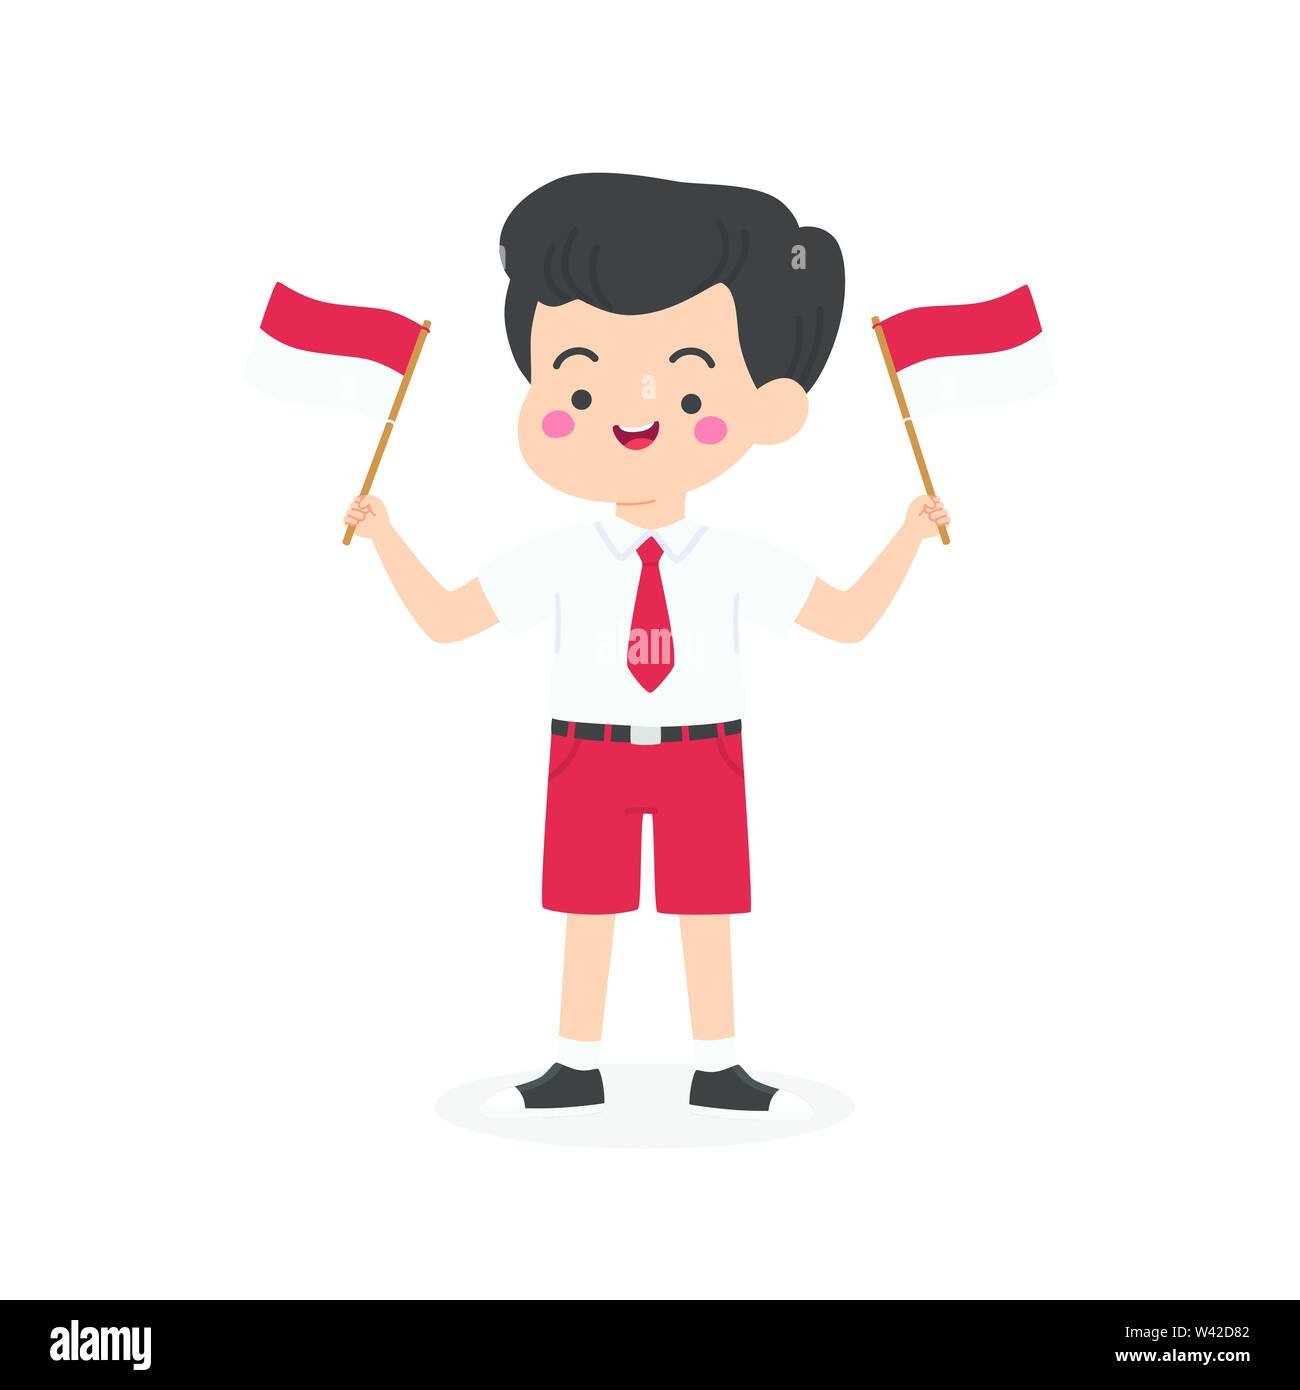 Cute Indonesian Elementary School Boy Student with Red and White Uniform Holding Flag, Indonesia Independence Day Cartoon Vector Illustration Stock Vector